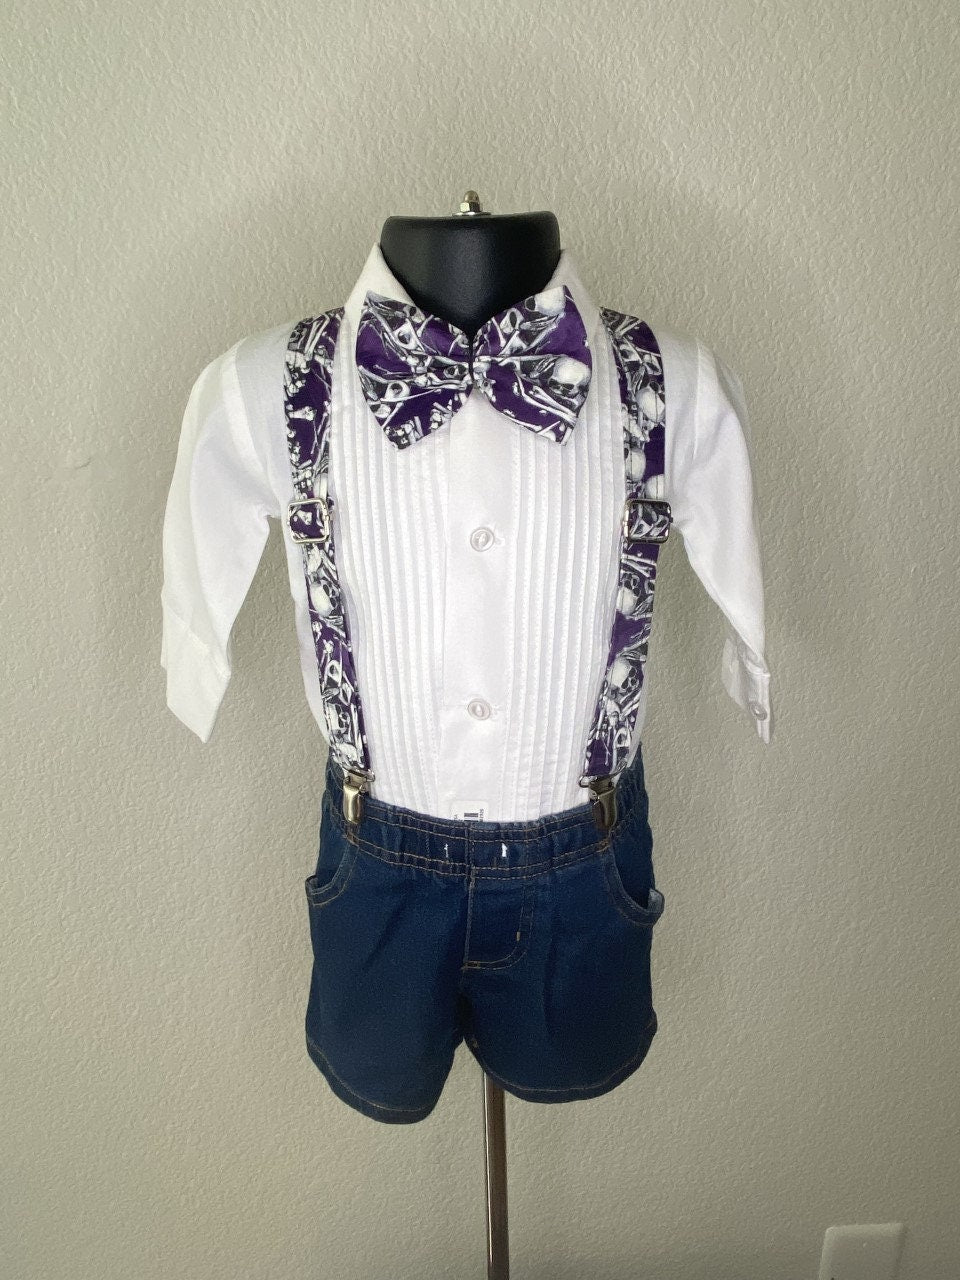 Halloween Skeleton Skull Purple suspenders and bow tie / Infant, Toddler, Child, Teen, Adult, Big & Tall